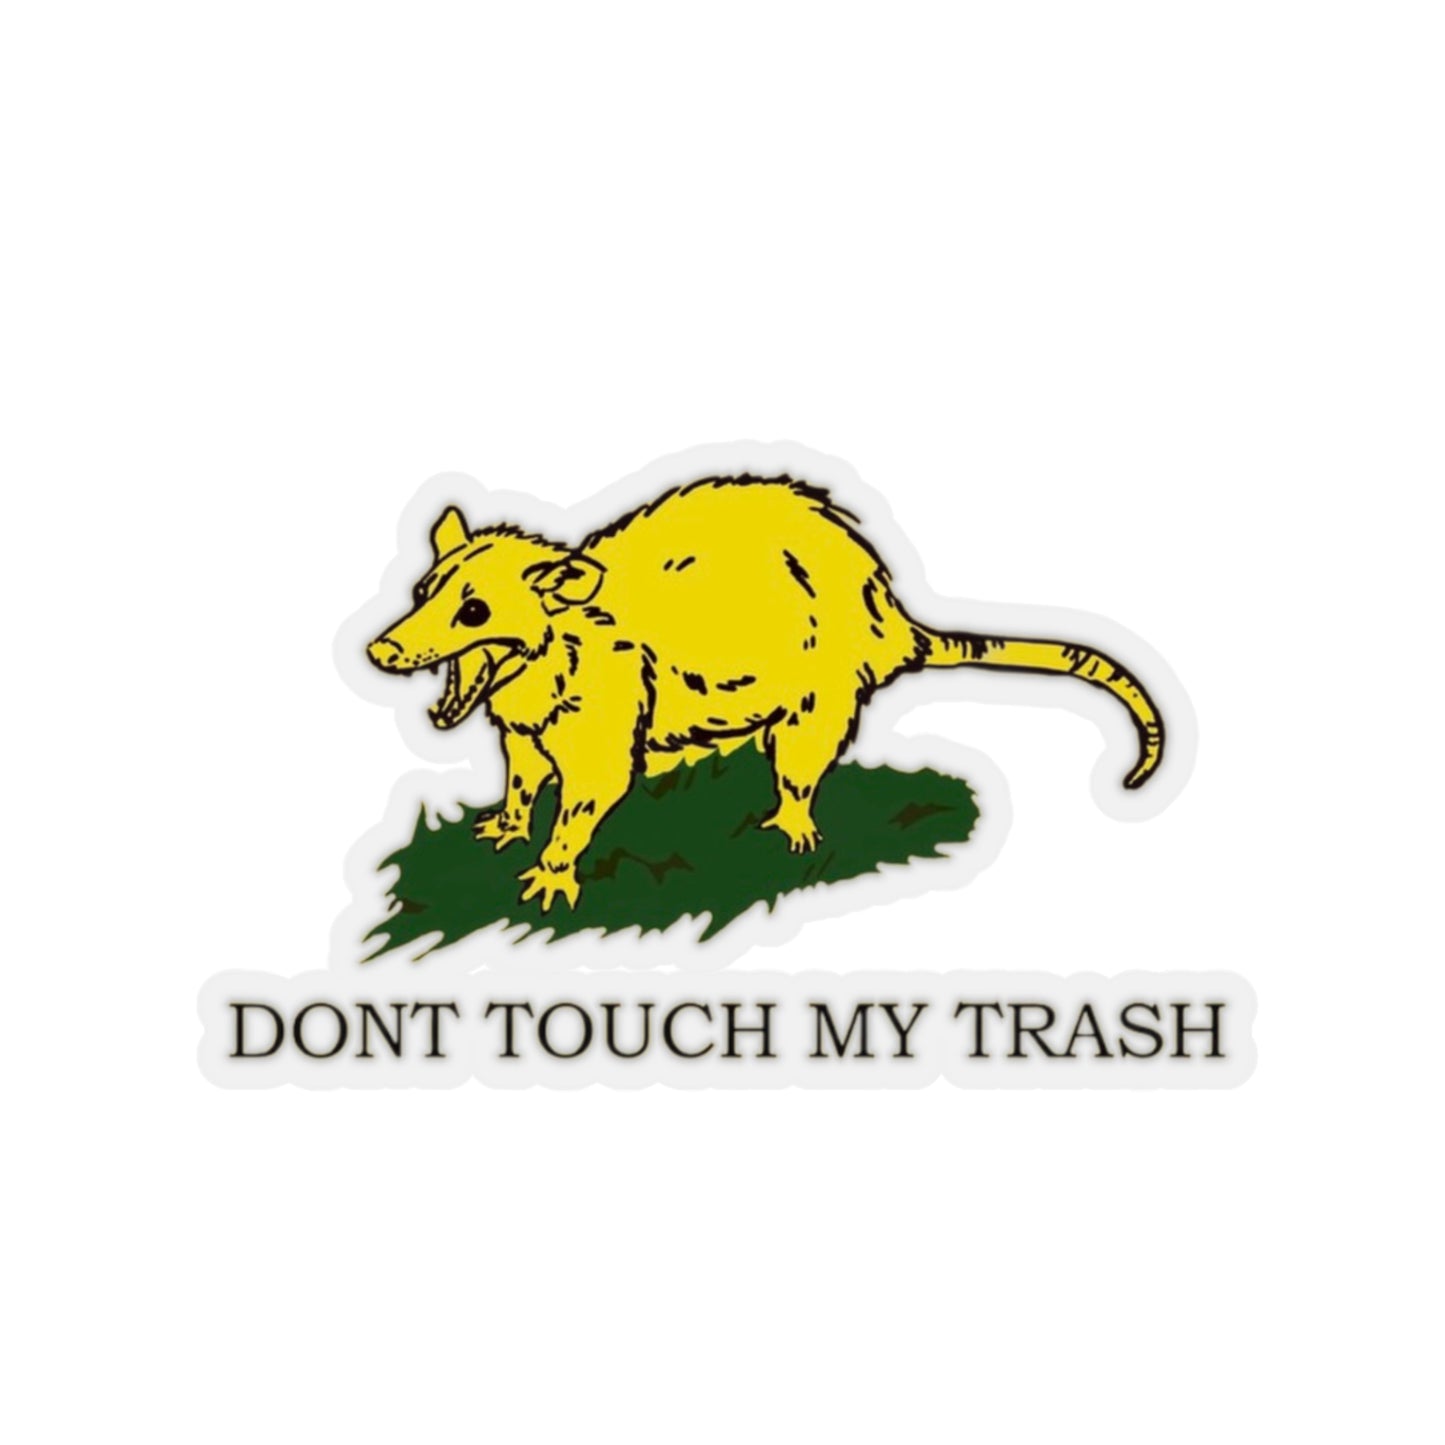 DONT TOUCH MY TRASH